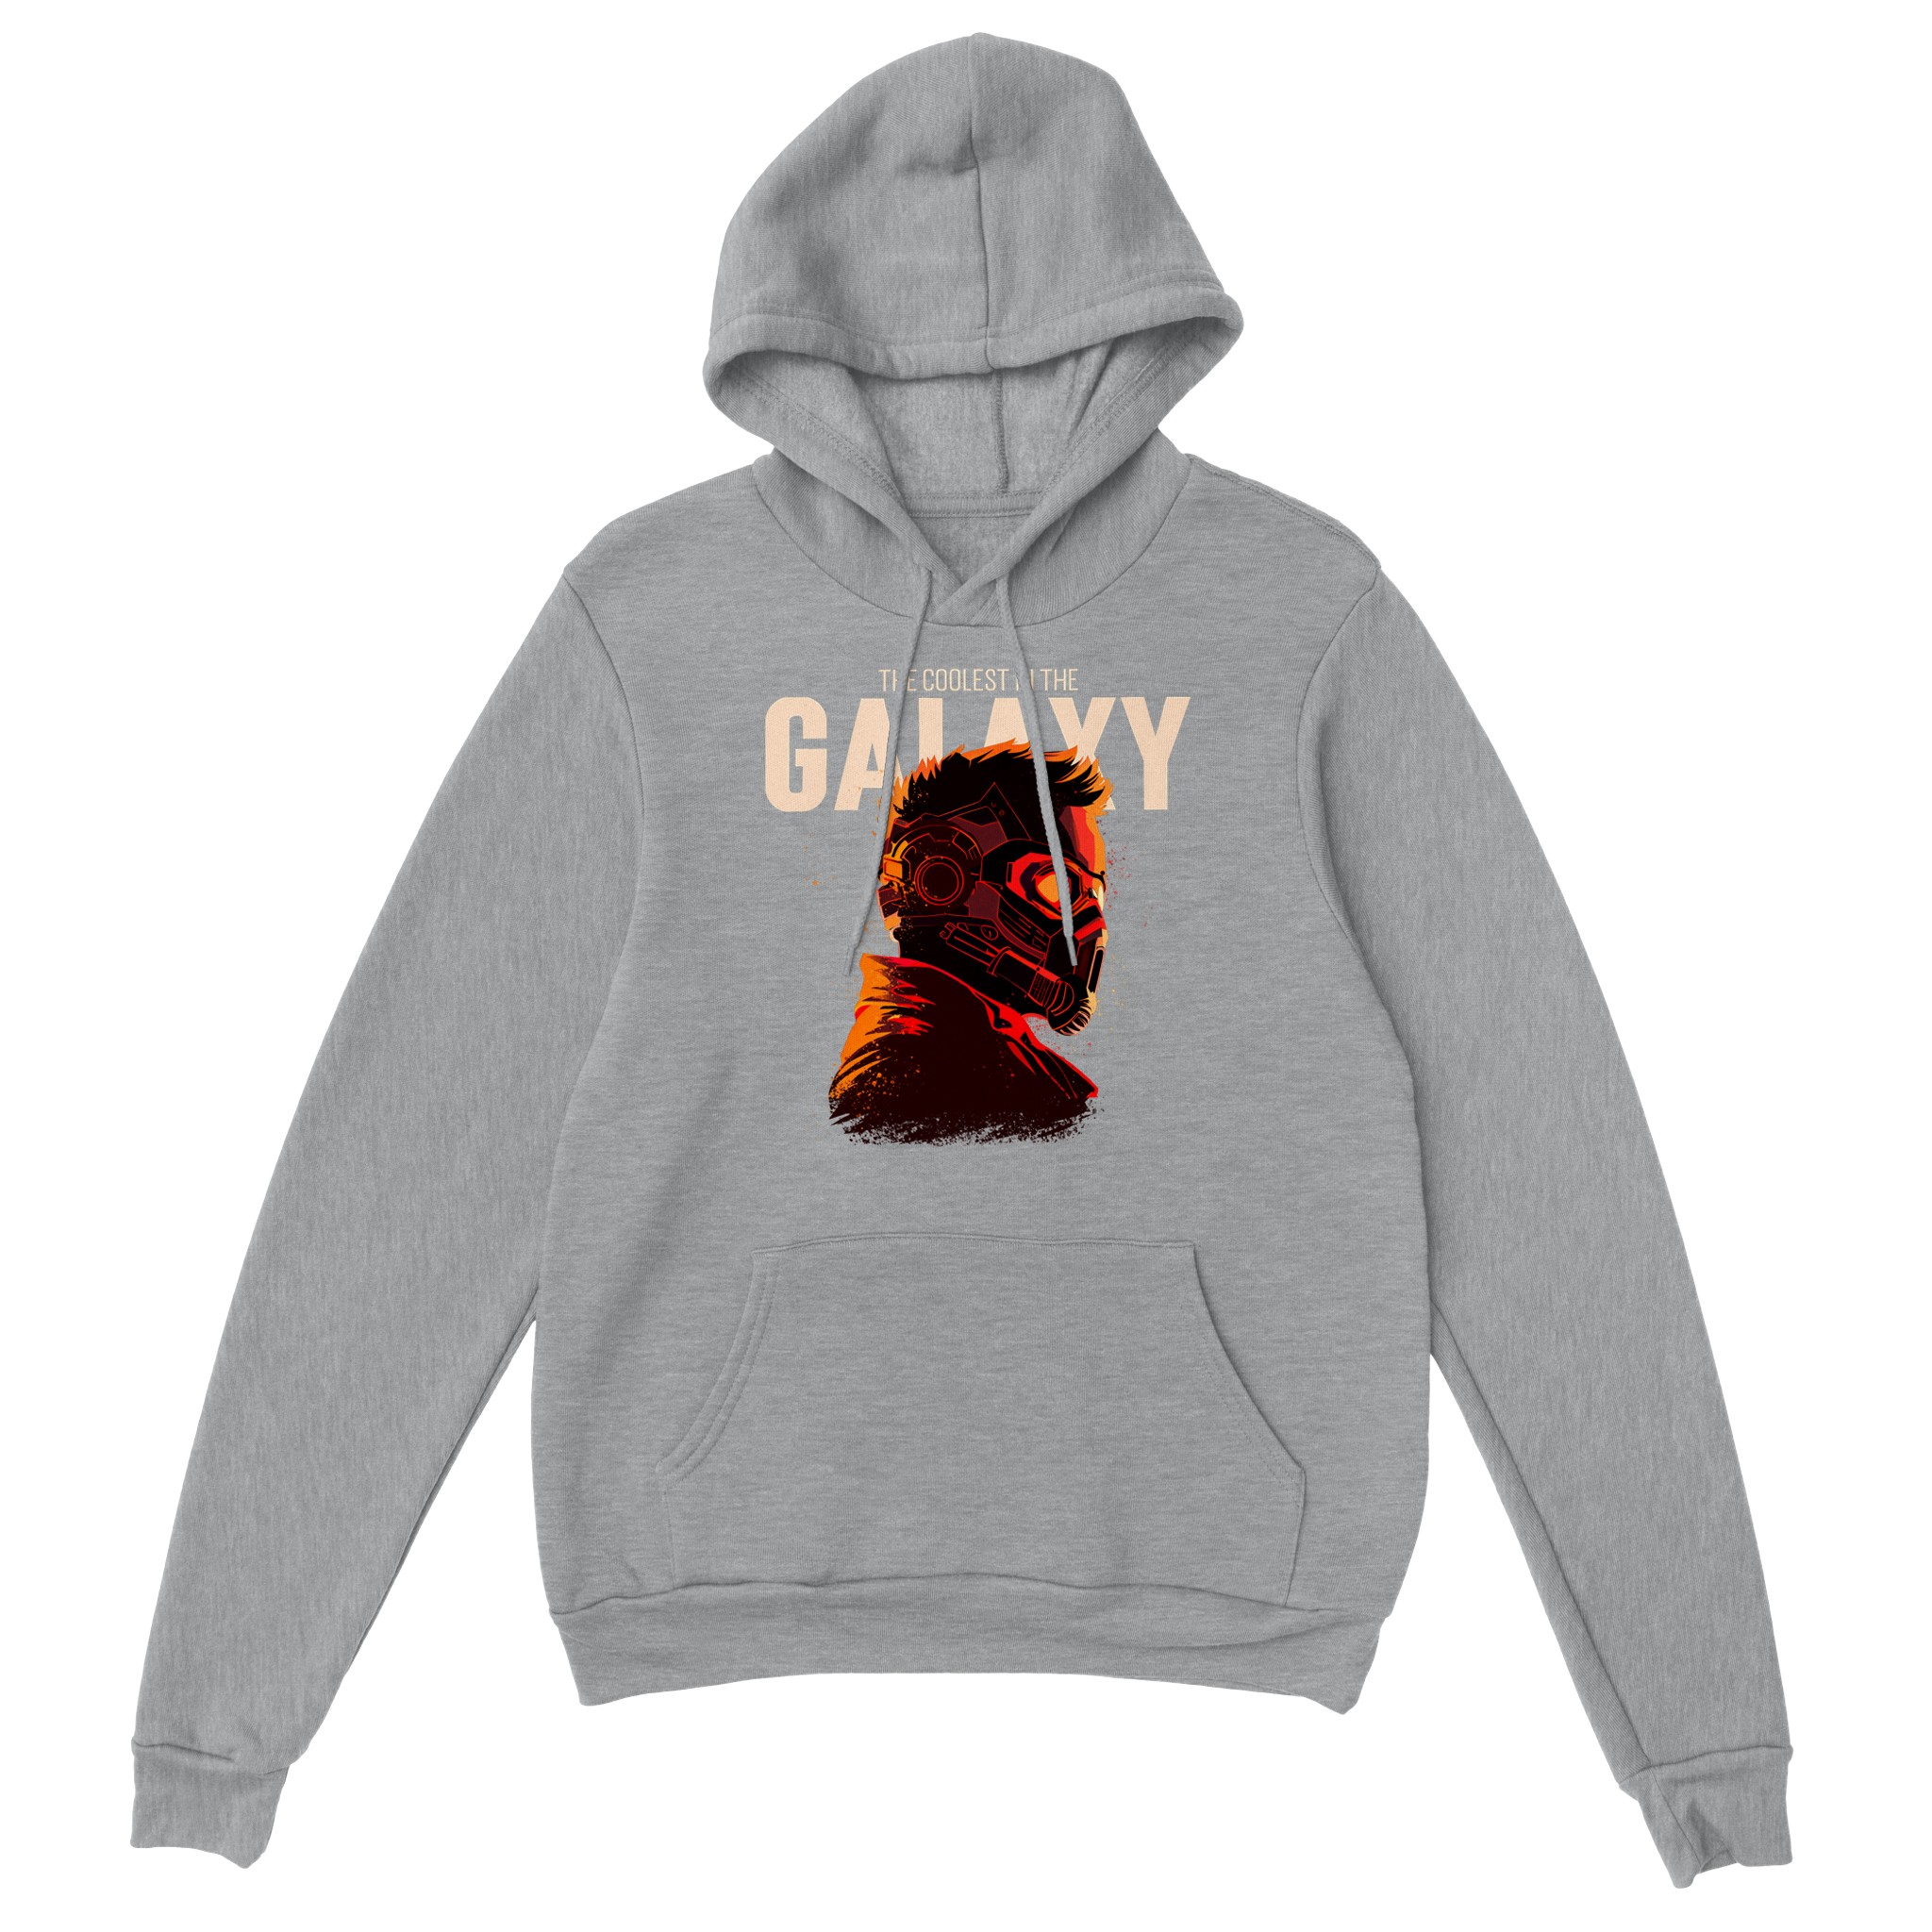 coolest in the galaxy design on a hoodie